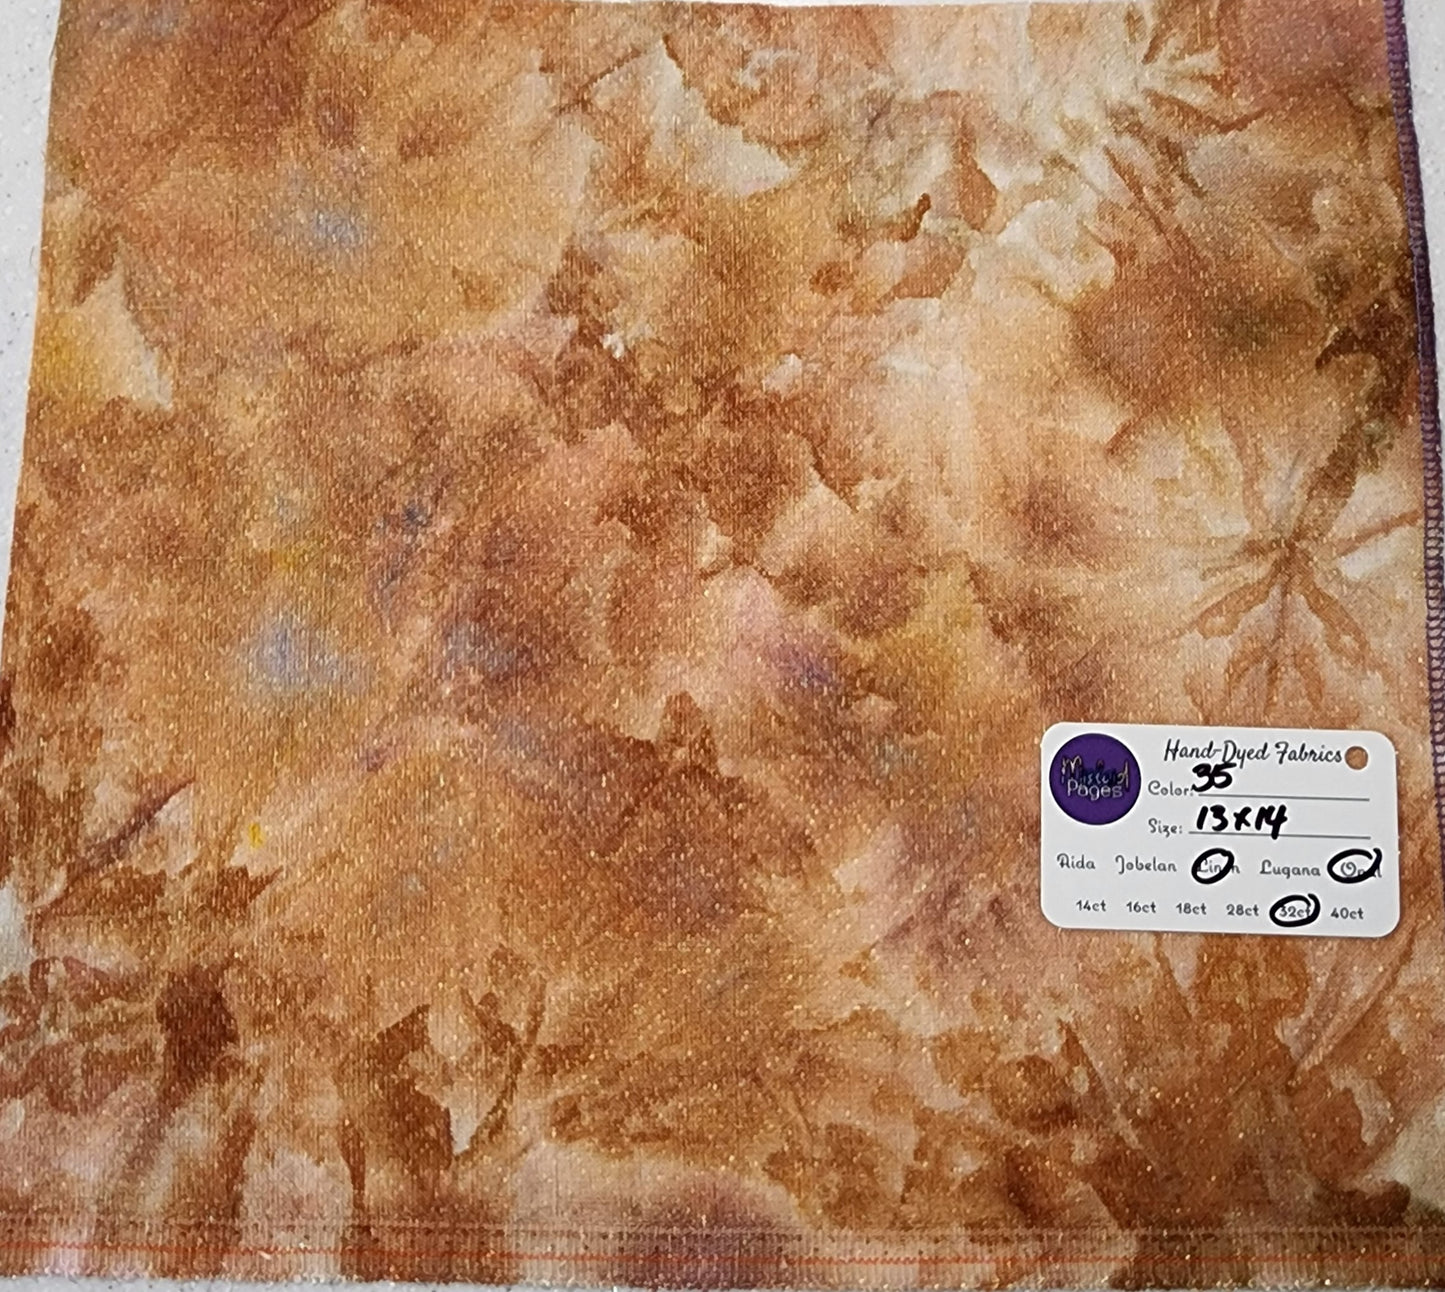 40ct Opal Linen - "Autumn's Bounty" Lot #35 - Hand-Dyed Fabric - October 2022 Release